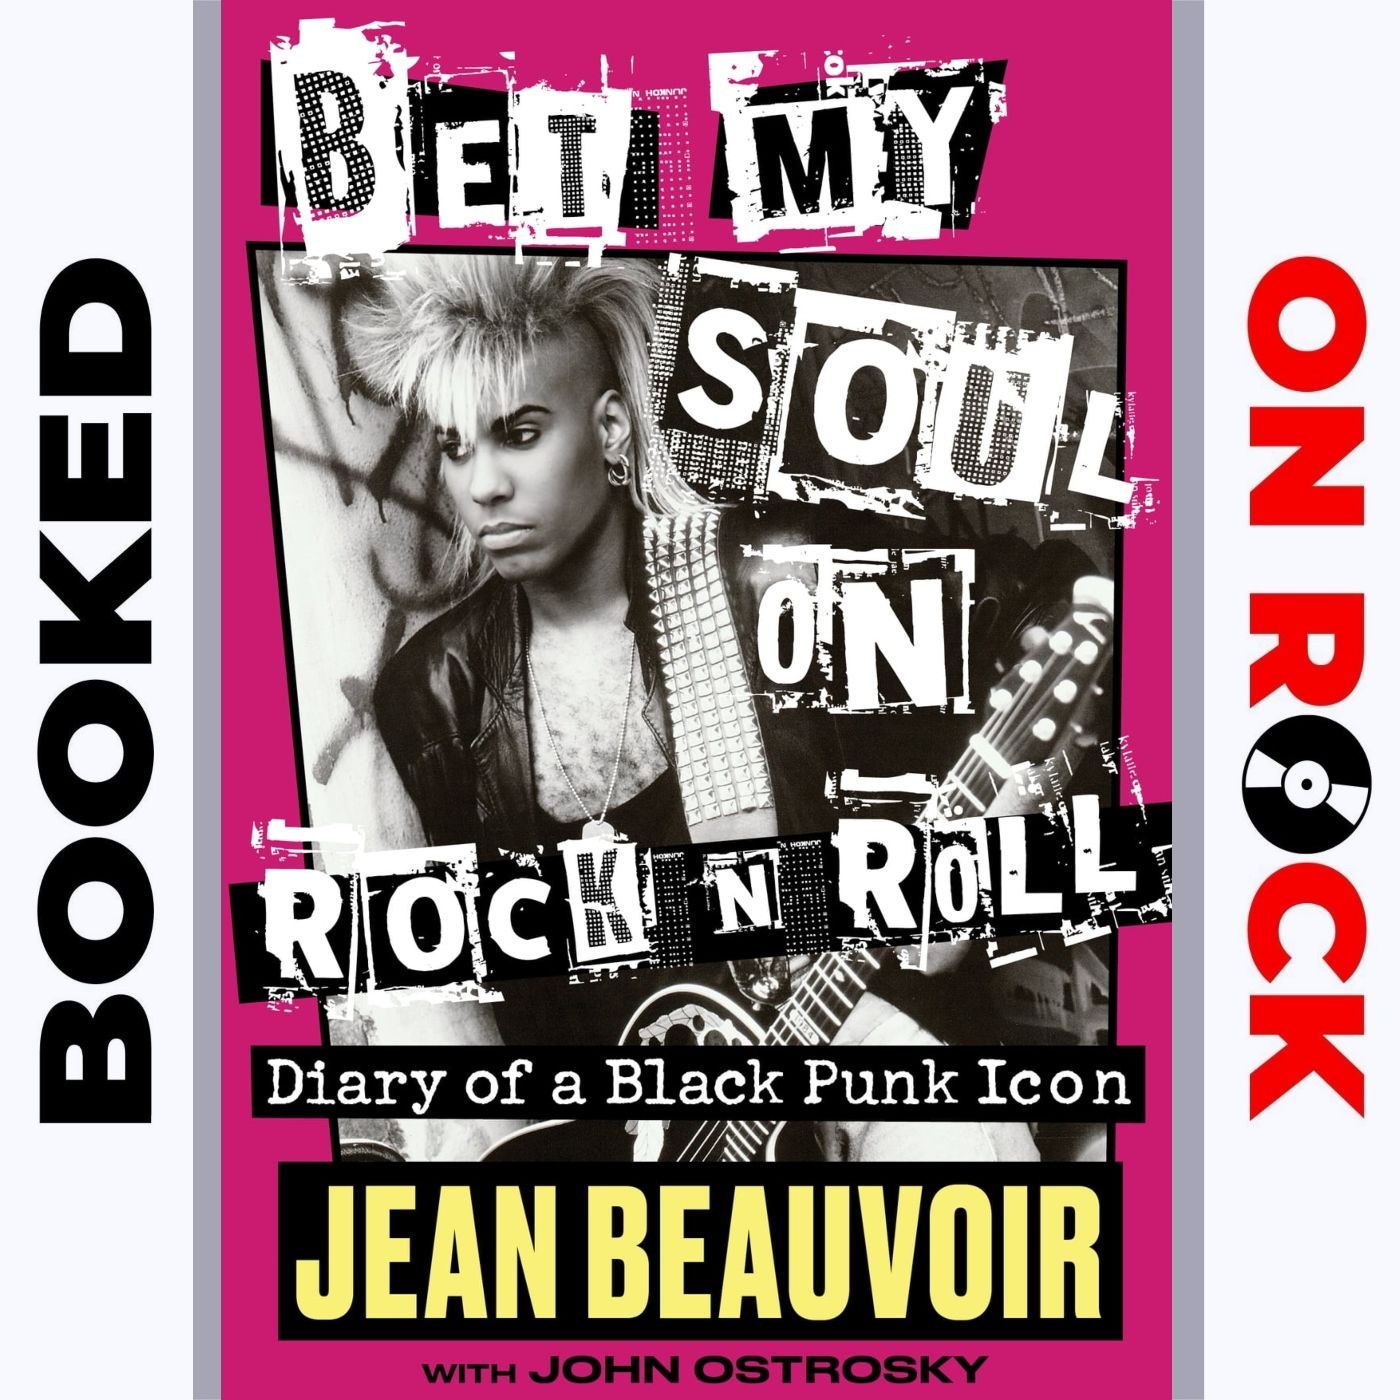 ”Bet My Soul on Rock ’n’ Roll: Diary of a Black Punk Icon”/Jean Beauvoir [Episode 61]